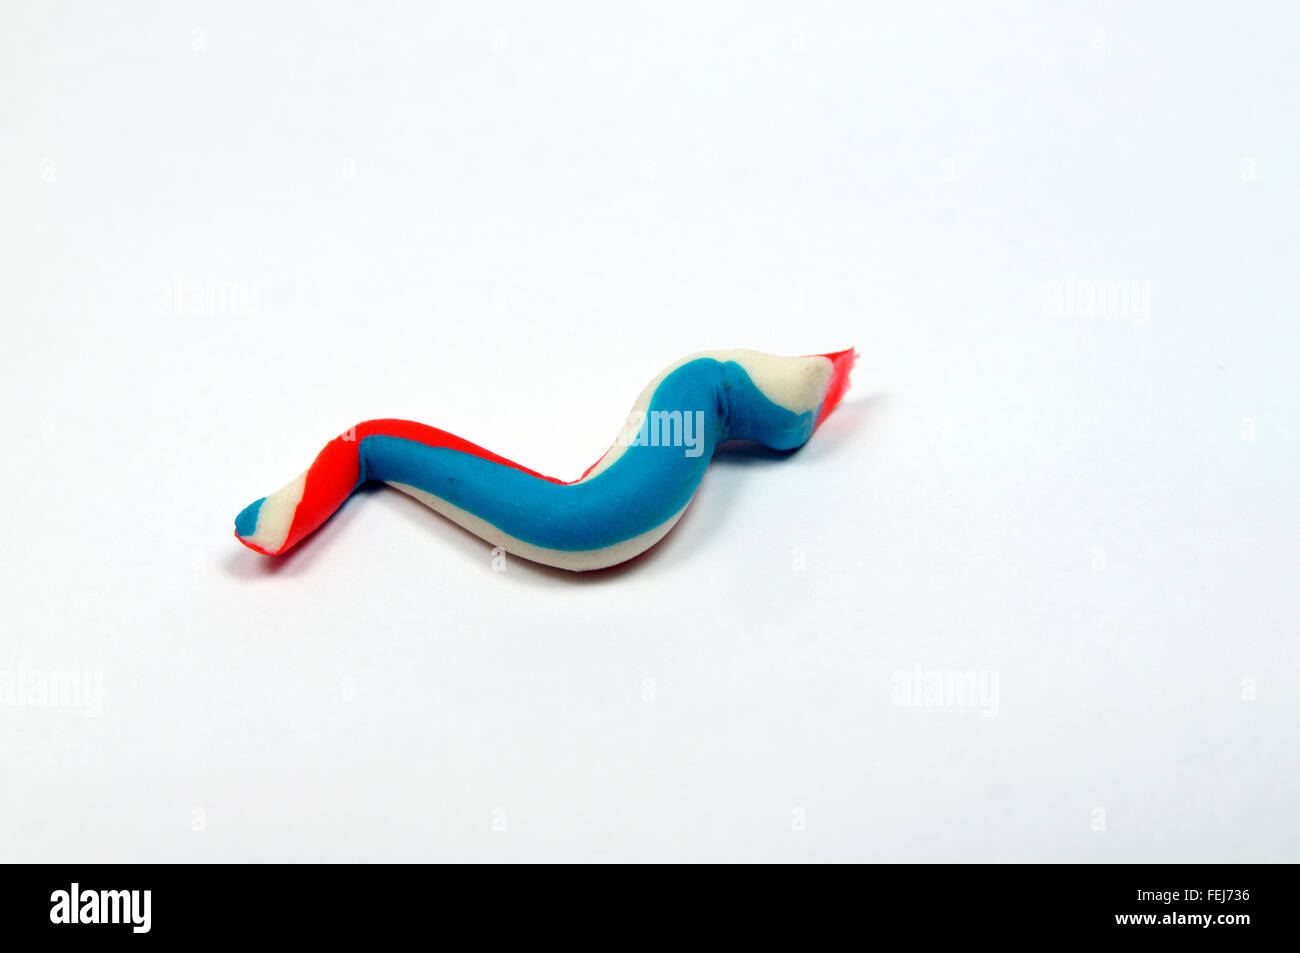 Imitation toothpaste made from  play doh. Stock Photo